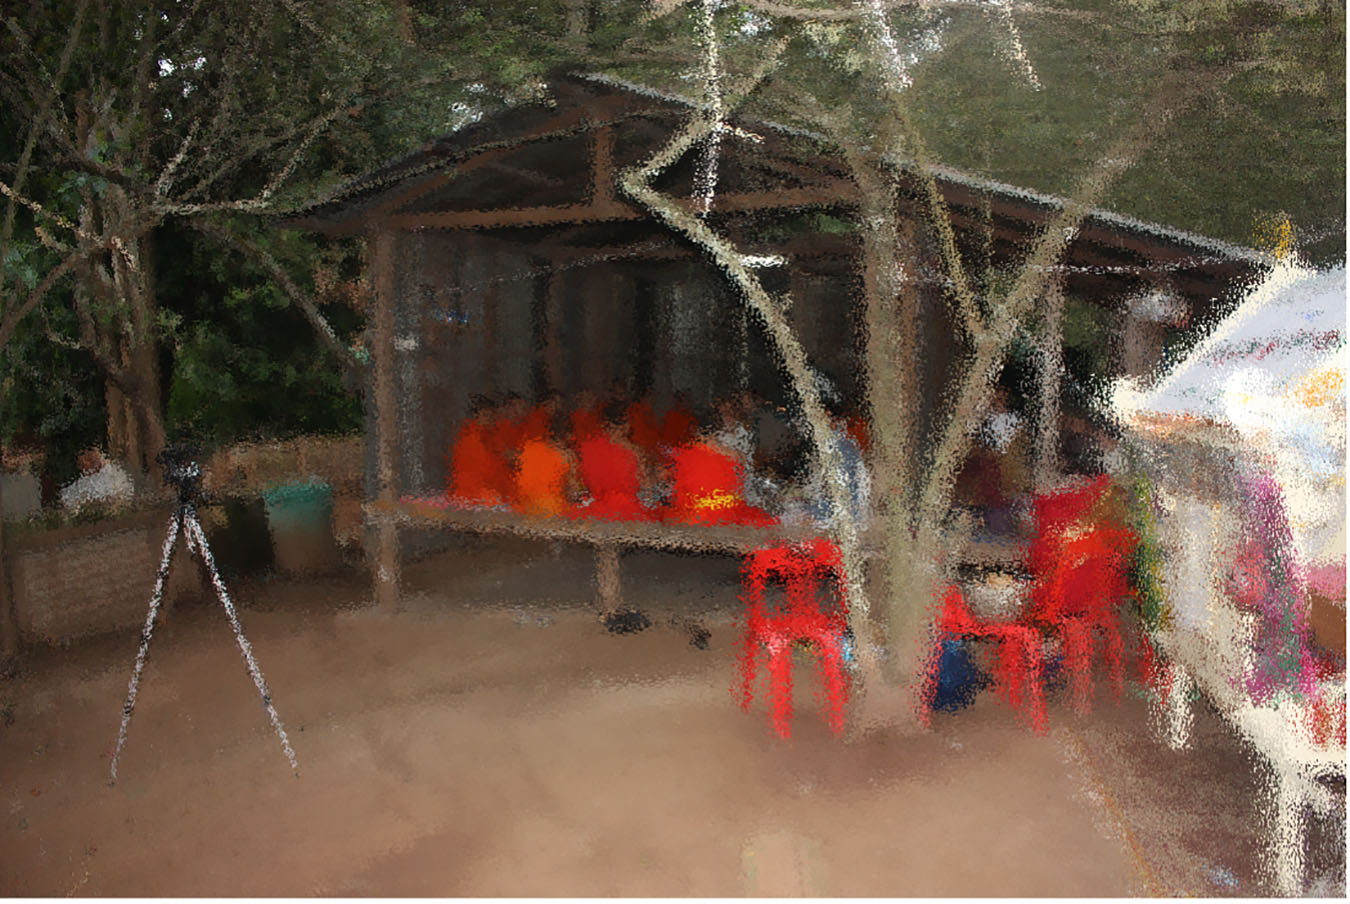 One of the structures of the house, full of monks, with my camera in the foreground (image is distorted to preserve anonymity). Photo by Charles H. P. Zuckerman.